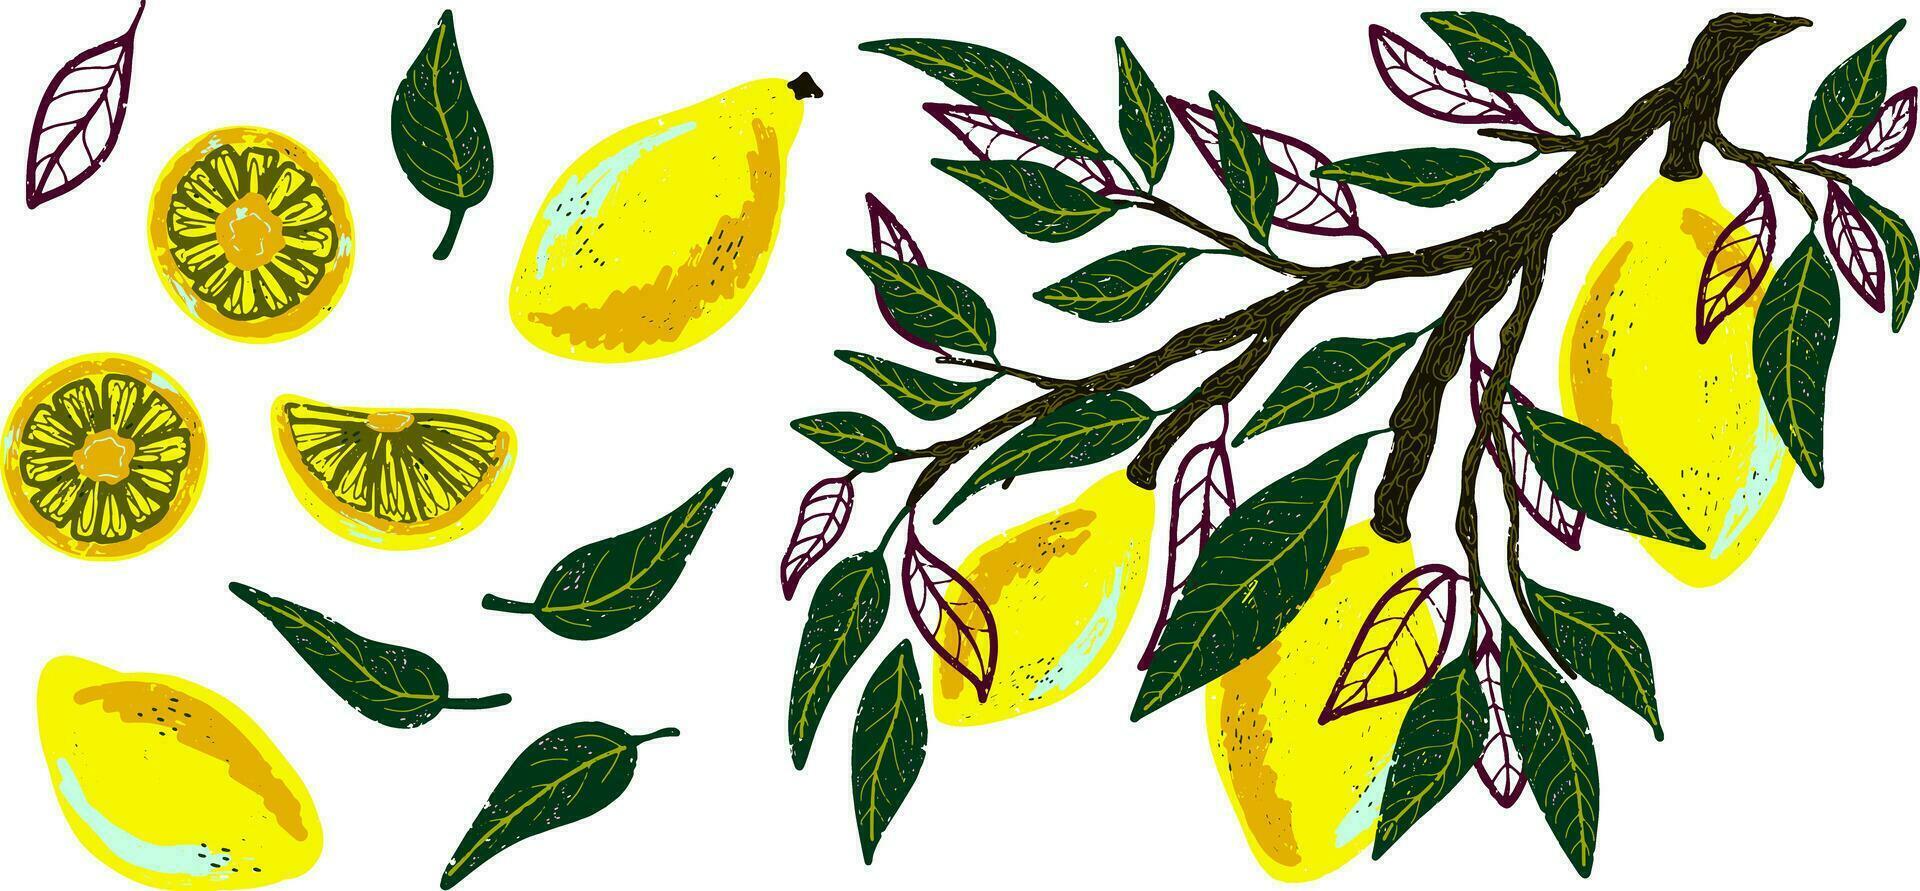 lemon tree with lemon slices and leaves vector